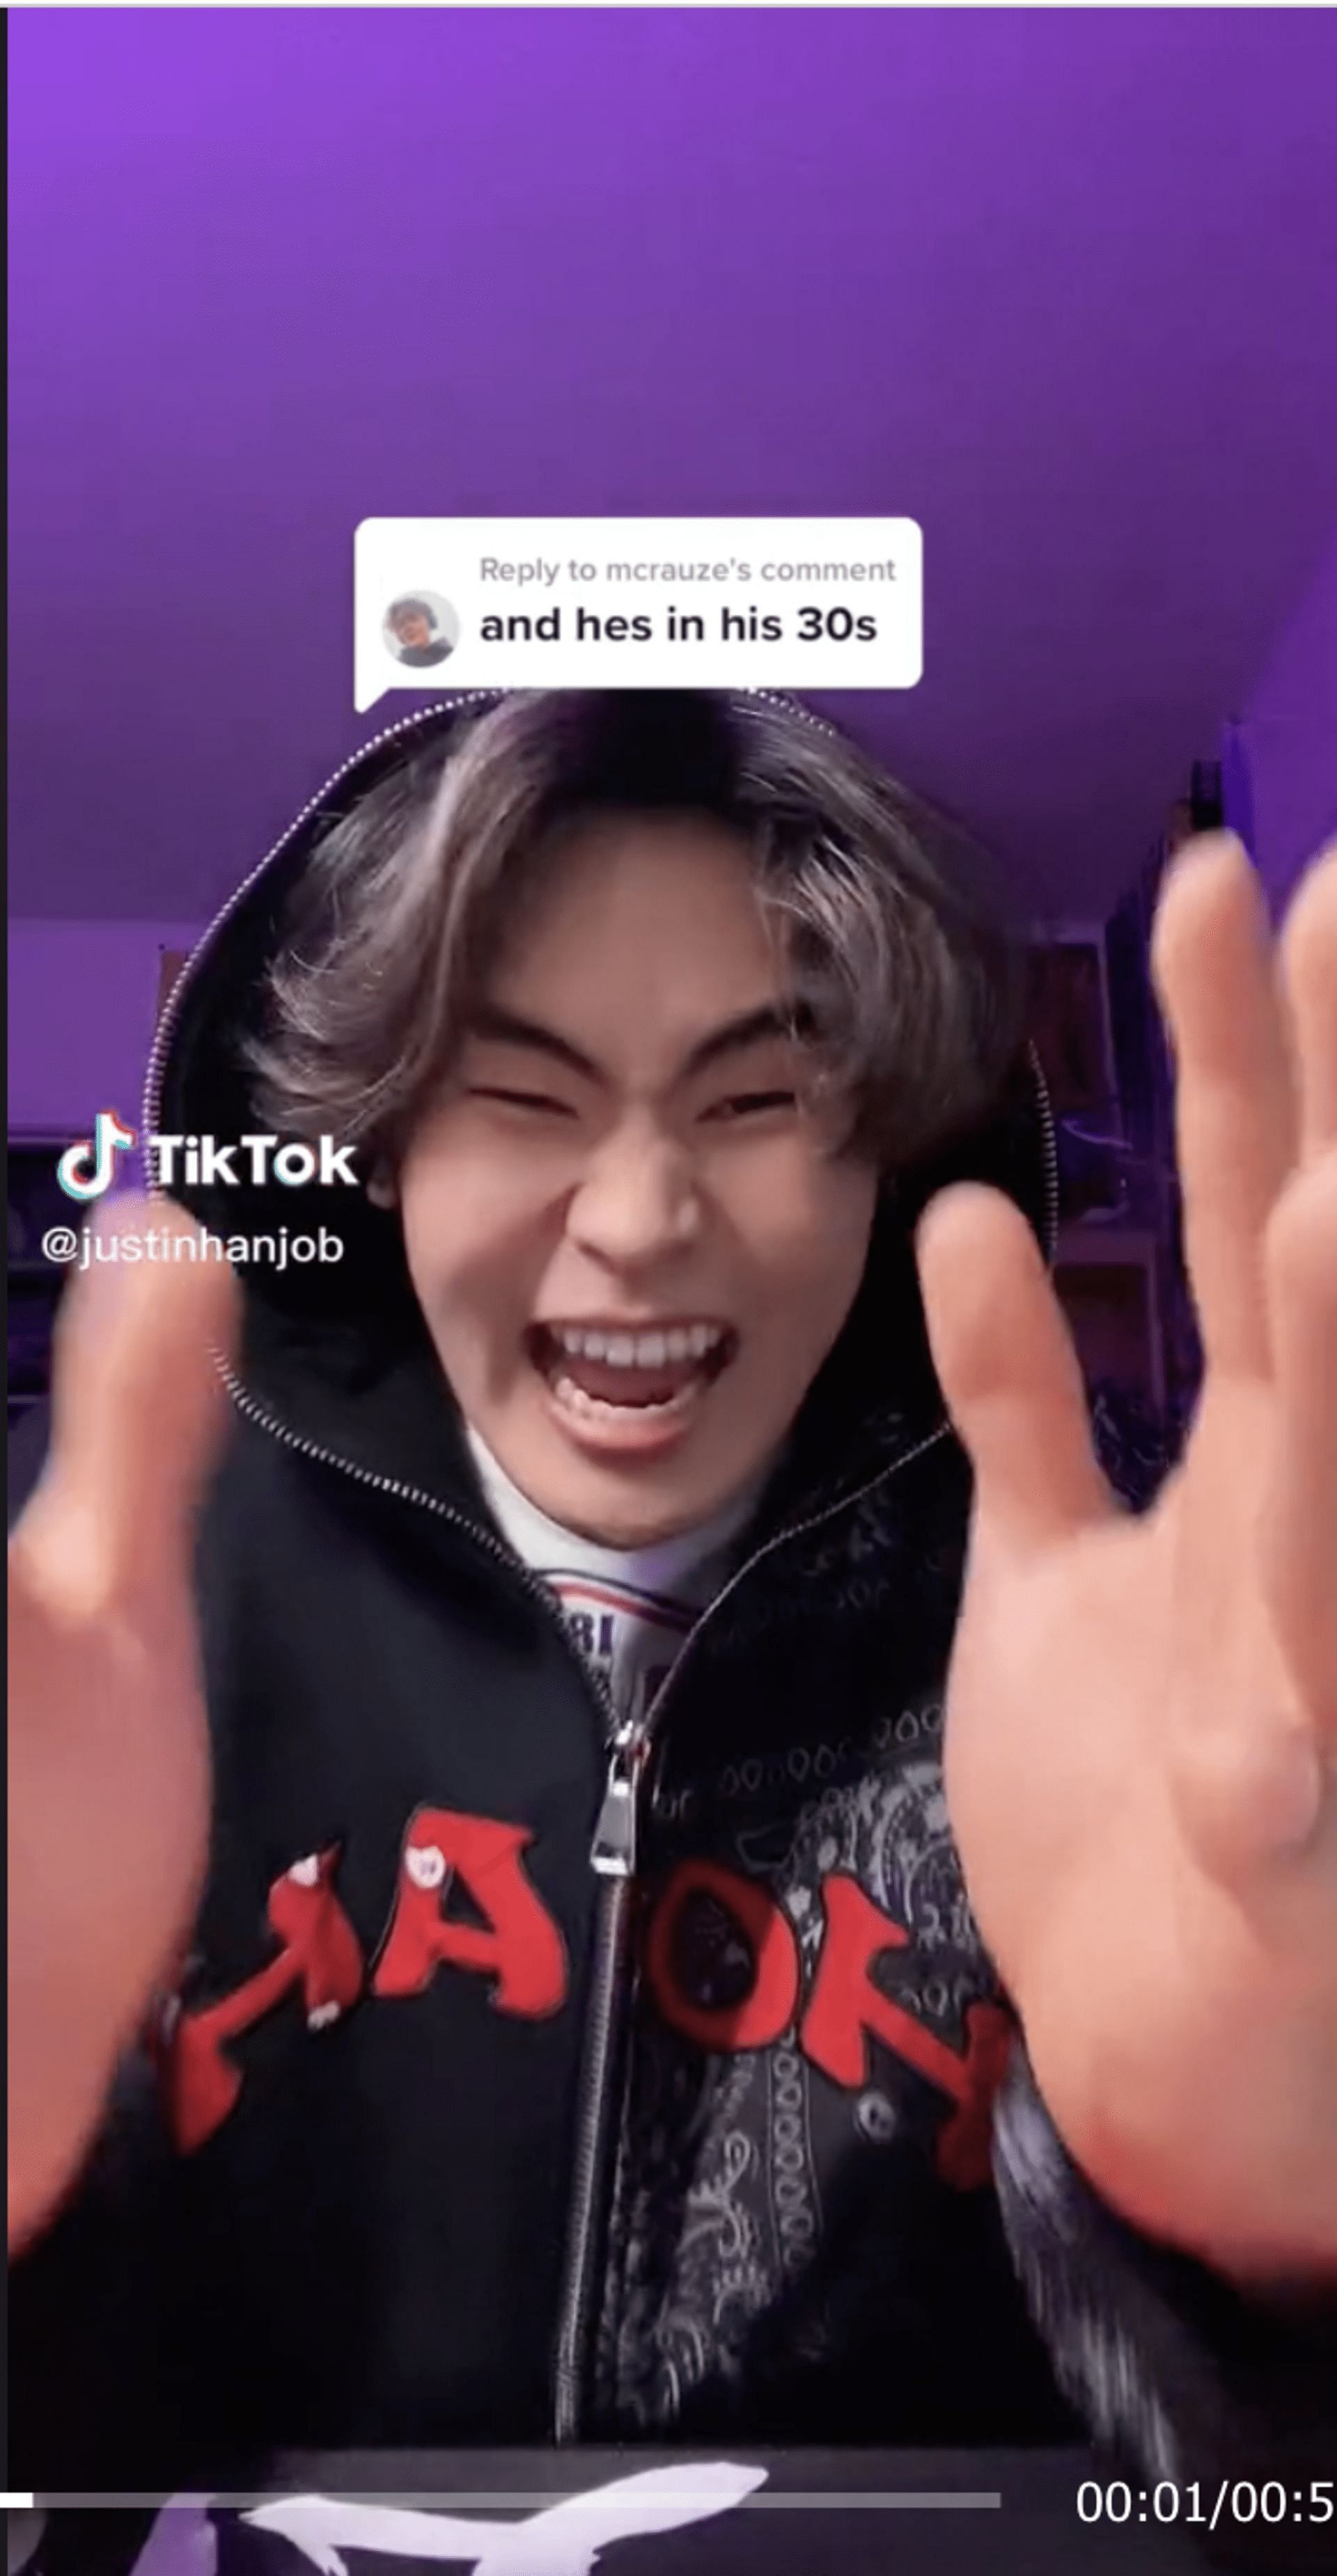 Justin Han made a video and posted on TikTok debunking the rumors about not being 30. (Image via TikTok)